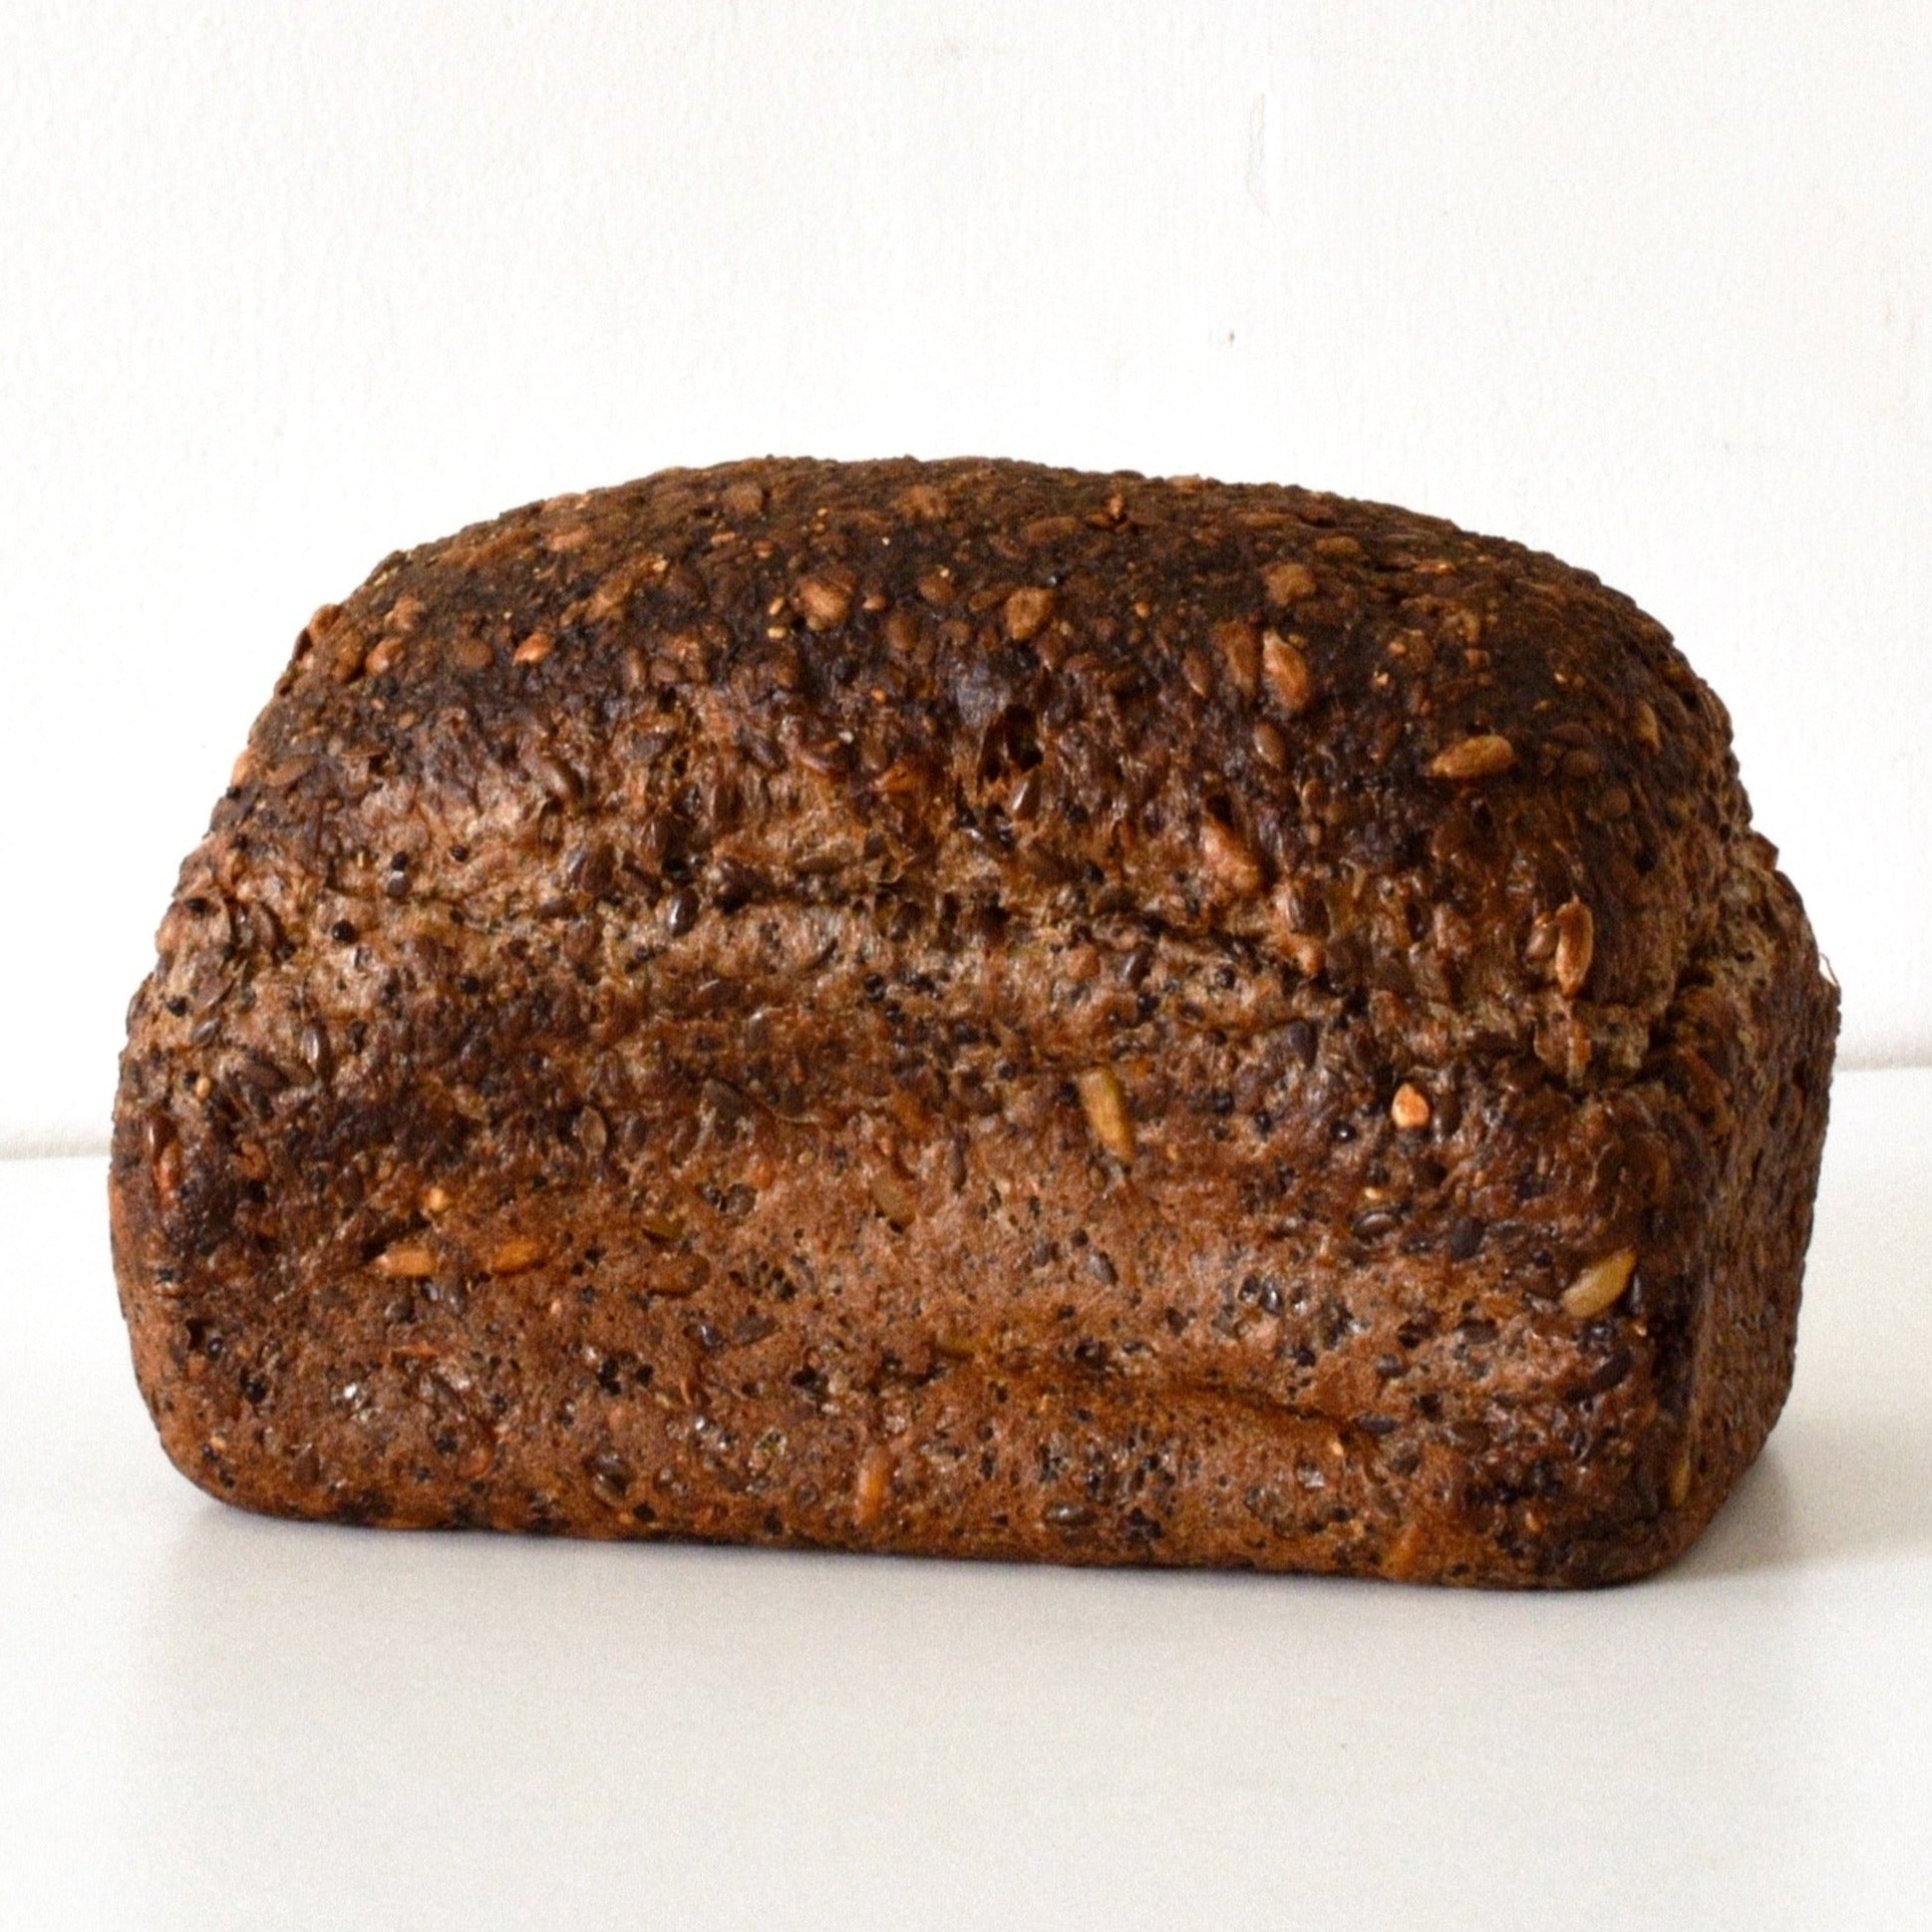 full image of the sprouted quinoa loaf, it is a dark brown and contains a multitude of seeds and grains 